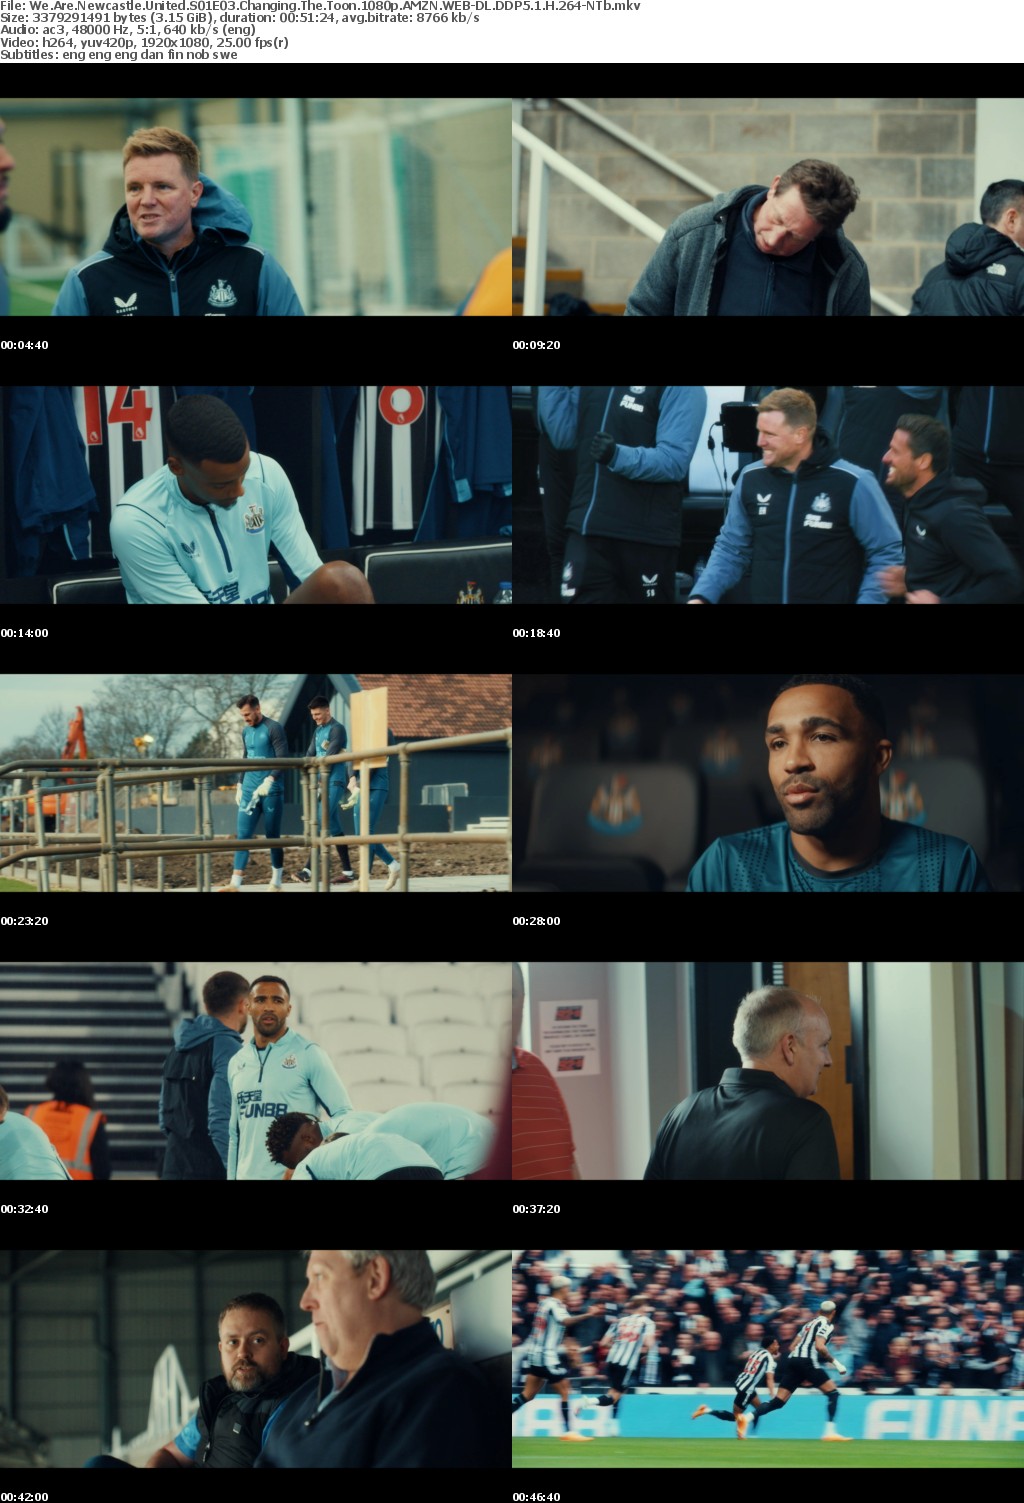 We Are Newcastle United S01E03 Changing The Toon 1080p AMZN WEB-DL DDP5 1 H 264-NTb